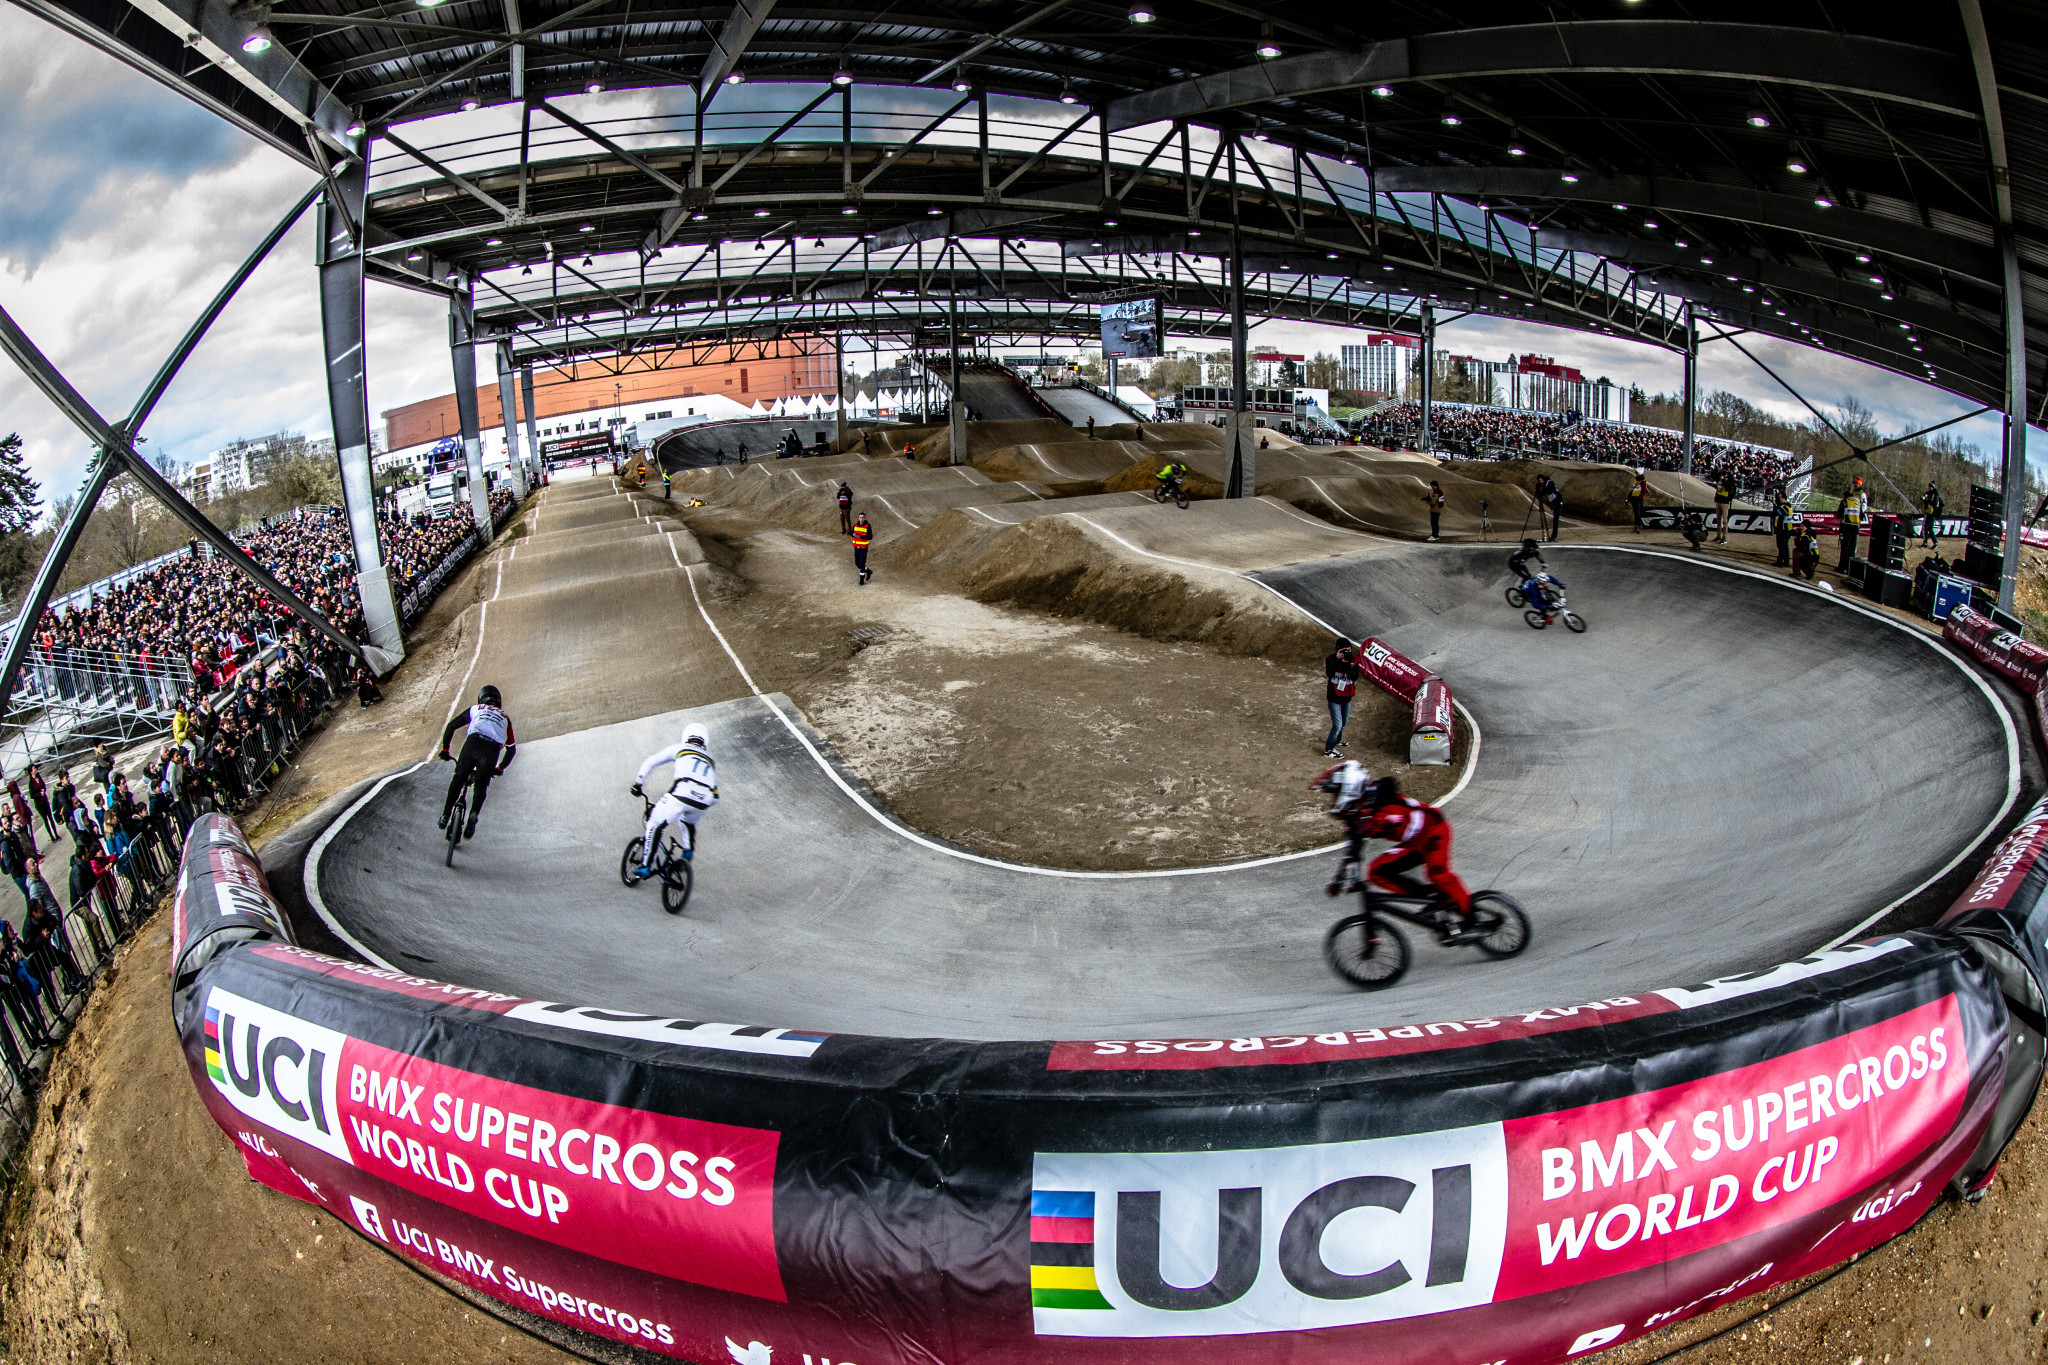 Rounds five and six of the International Cycling Union BMX Supercross World Cup will take place at Saint-Quentin-en-Yvelines in France ©Craig Dutton